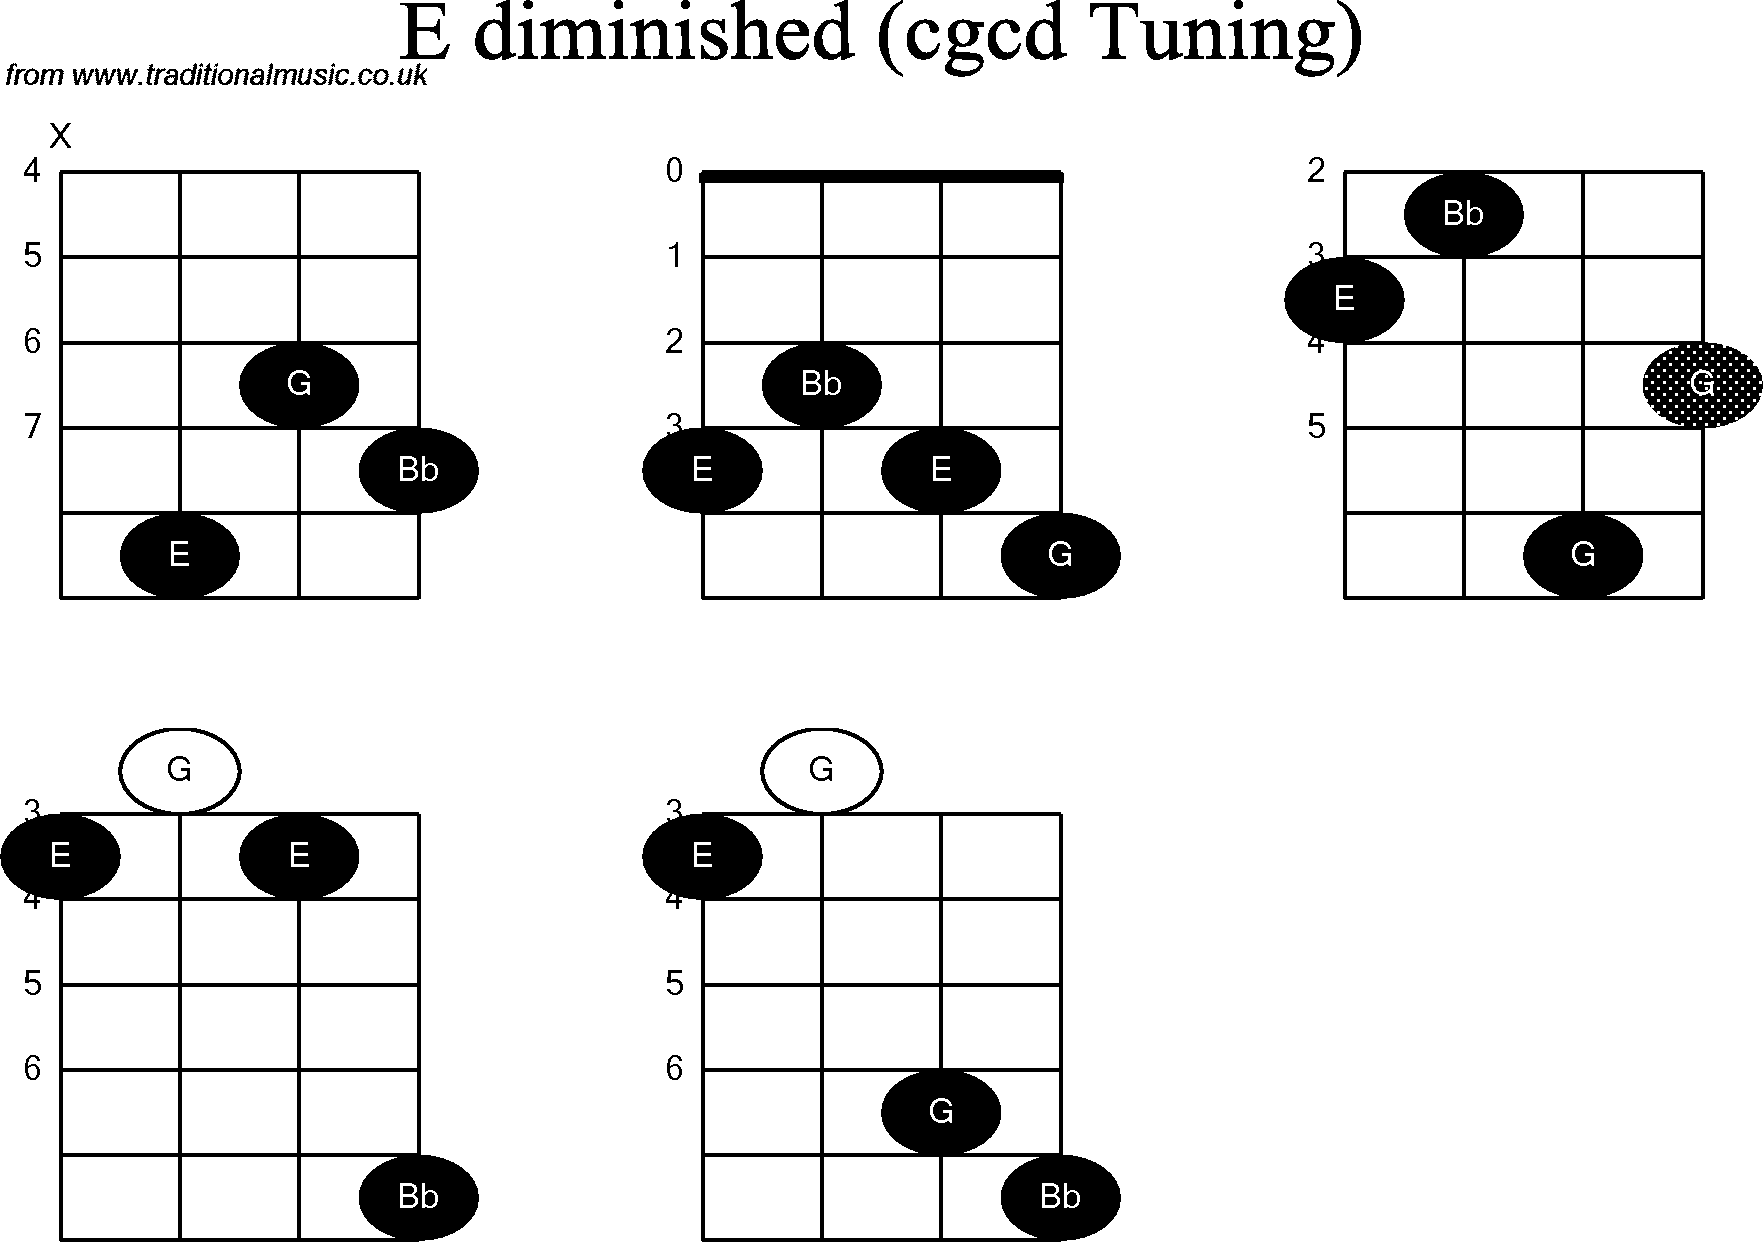 Chord diagrams for Banjo(Double C) E Diminished